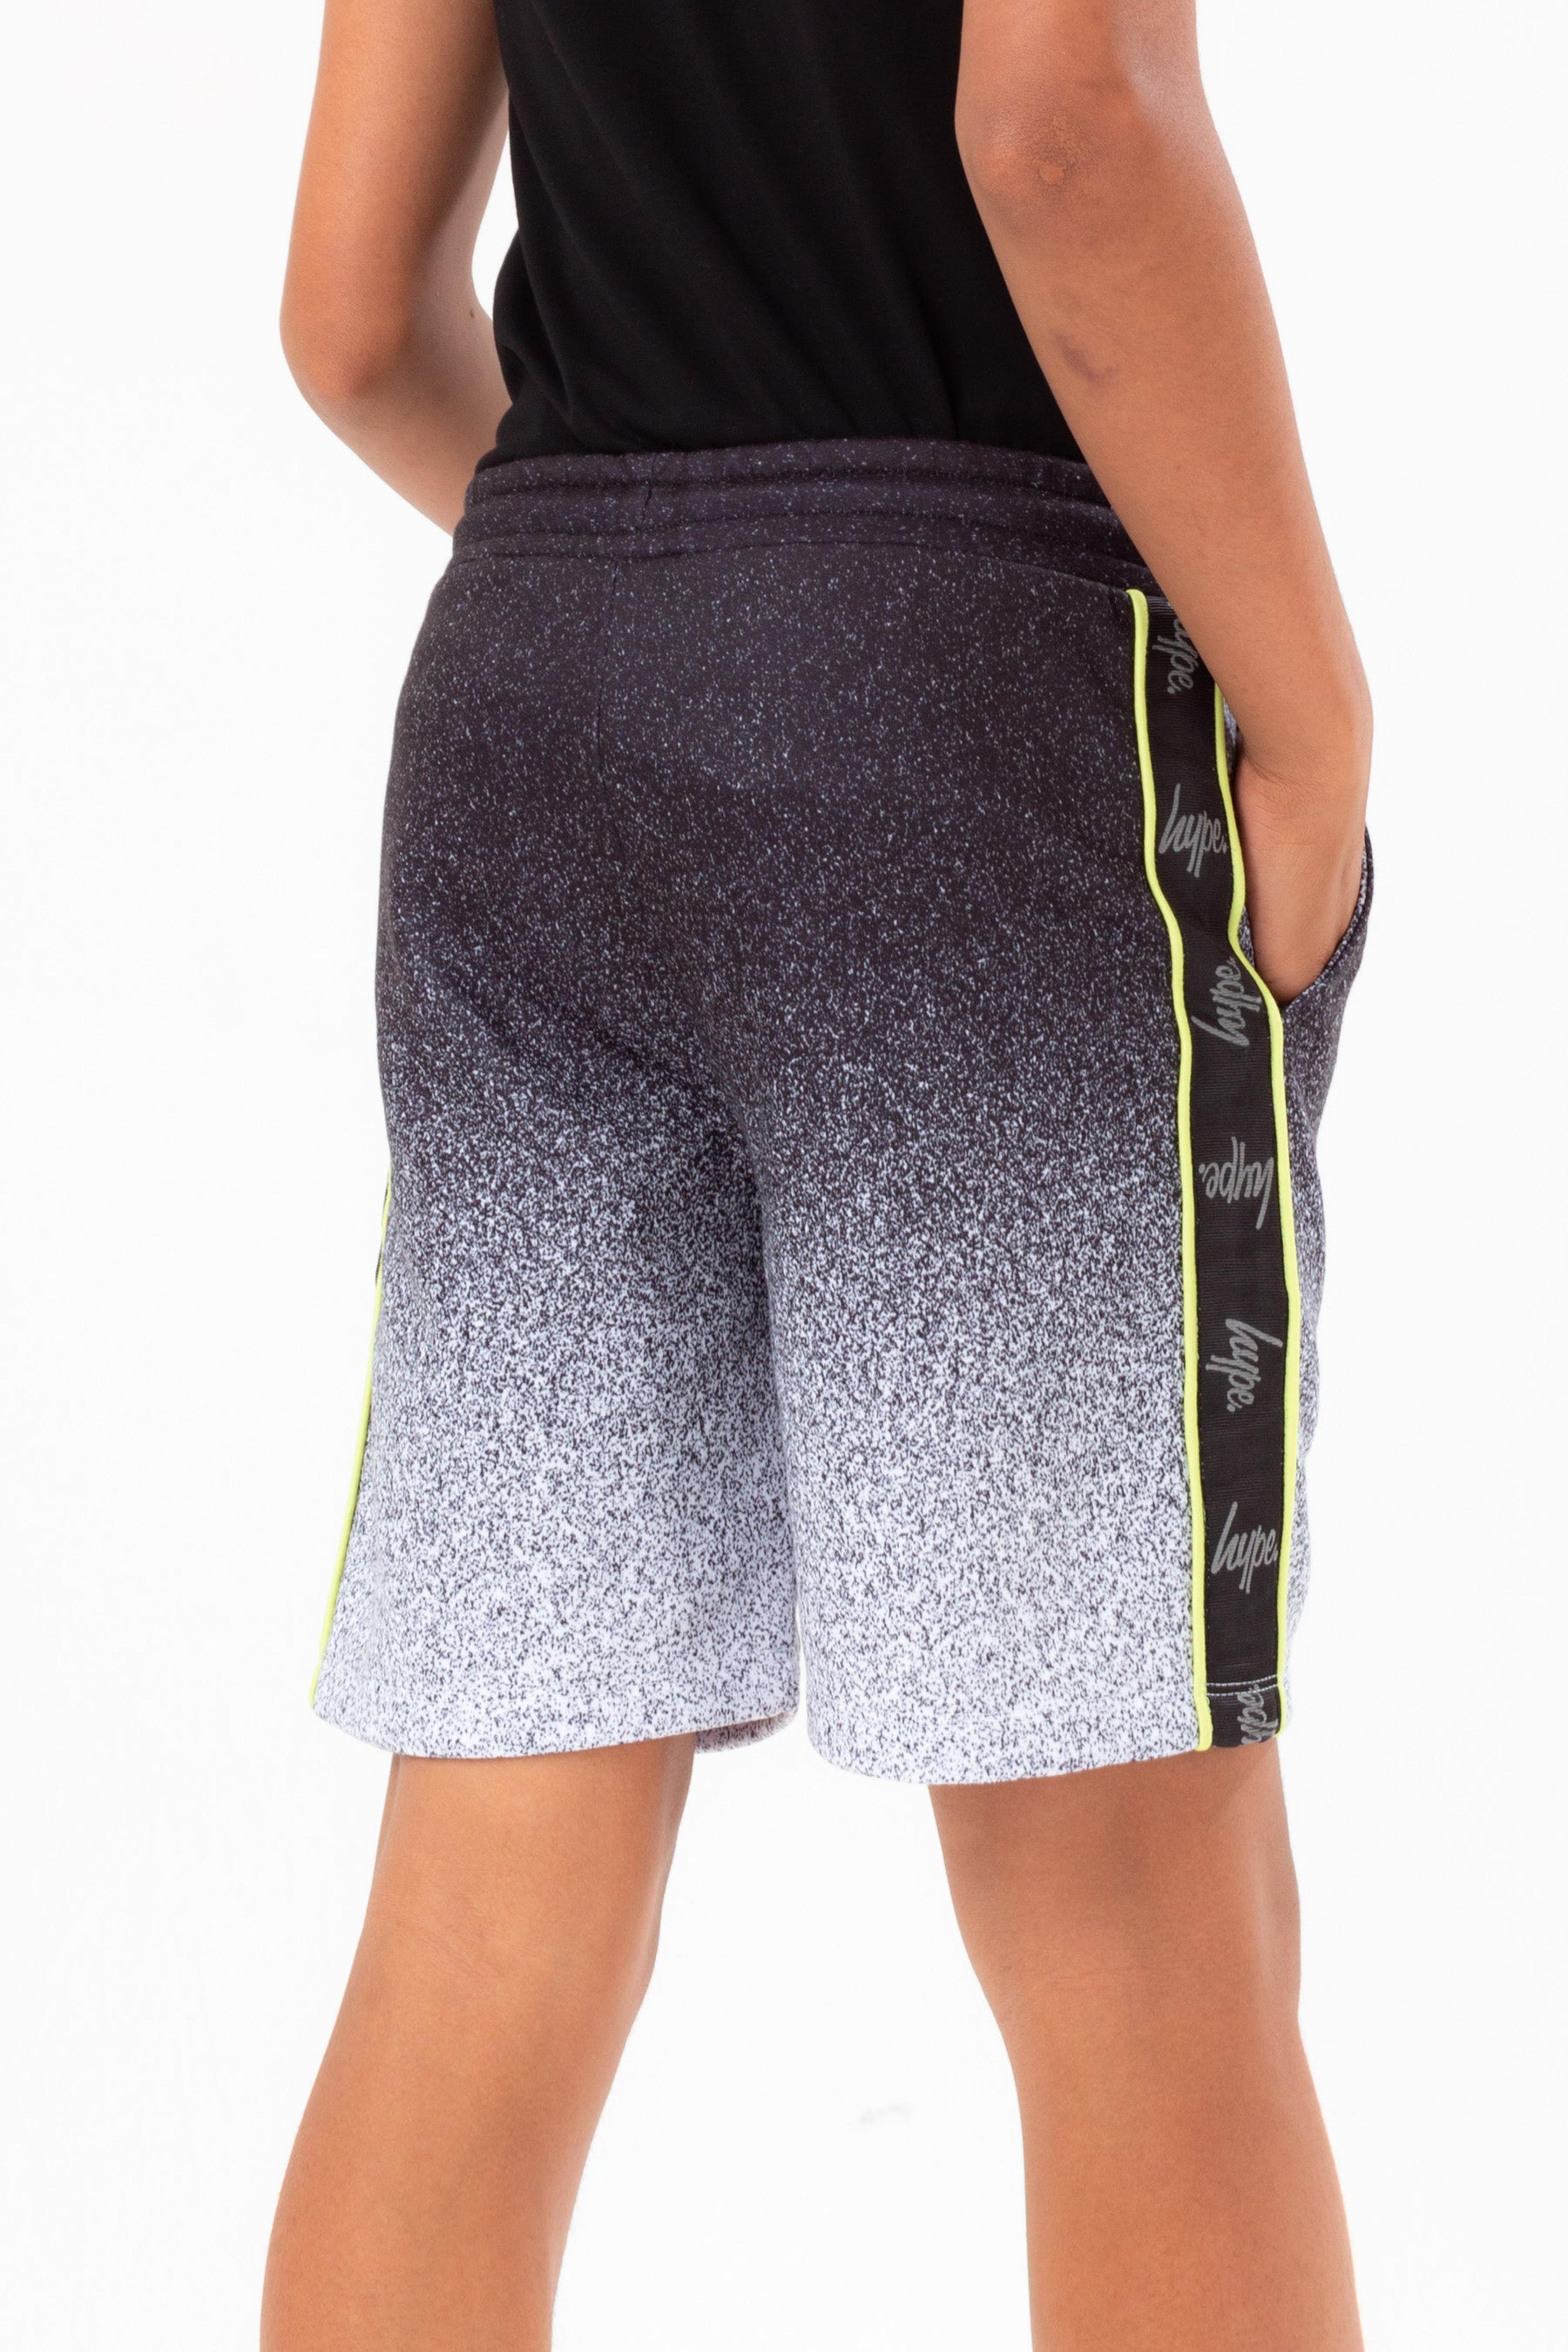 Alternate View 1 of HYPE BOYS MONO SPECKLE FADE LIME TAPE SCRIPT SHORTS